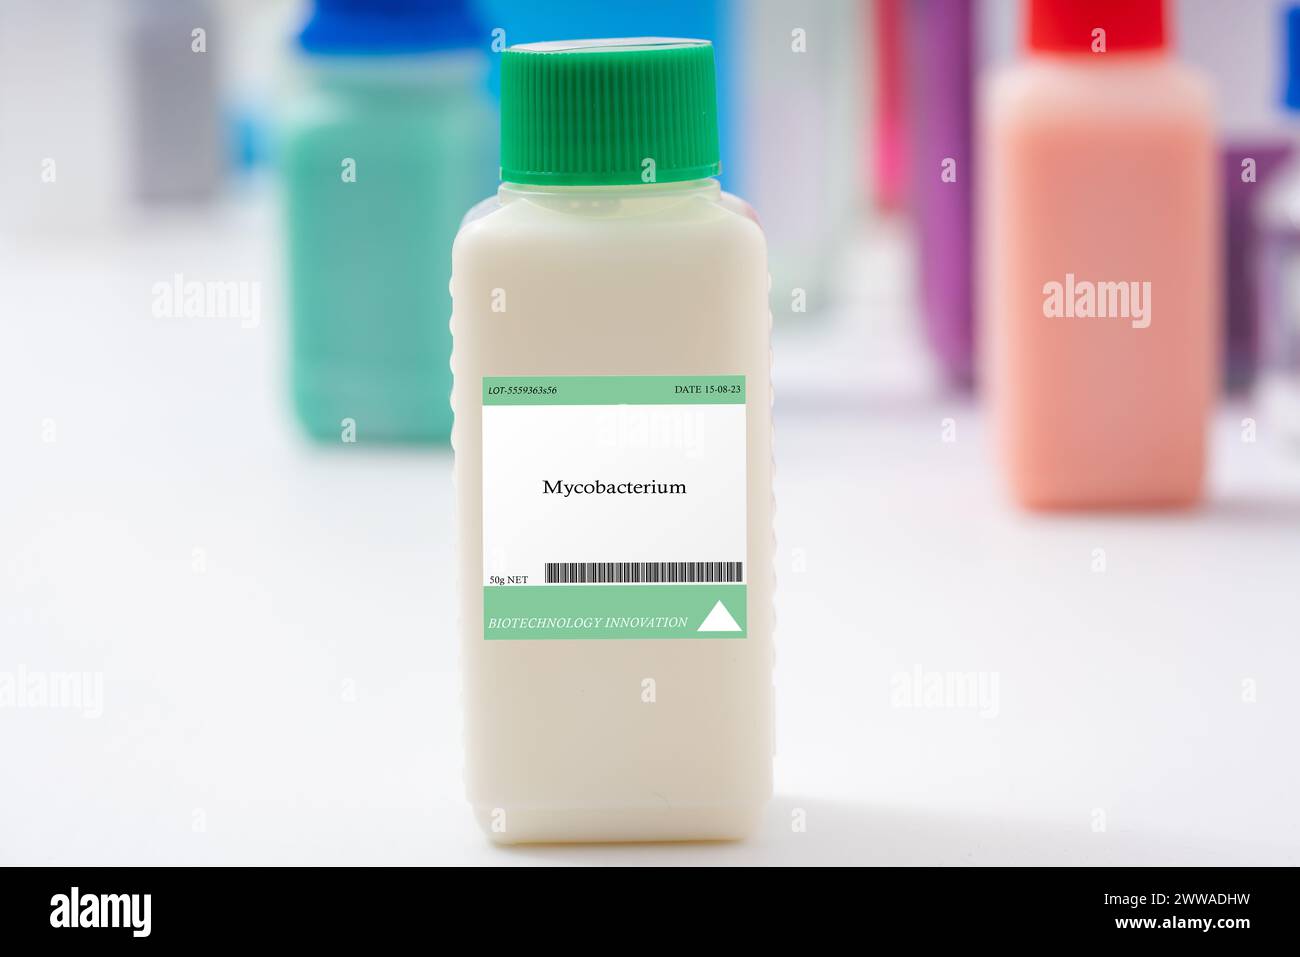 Mycobacterium bacteria. Used in the production of enzymes and flavourings. Stock Photo